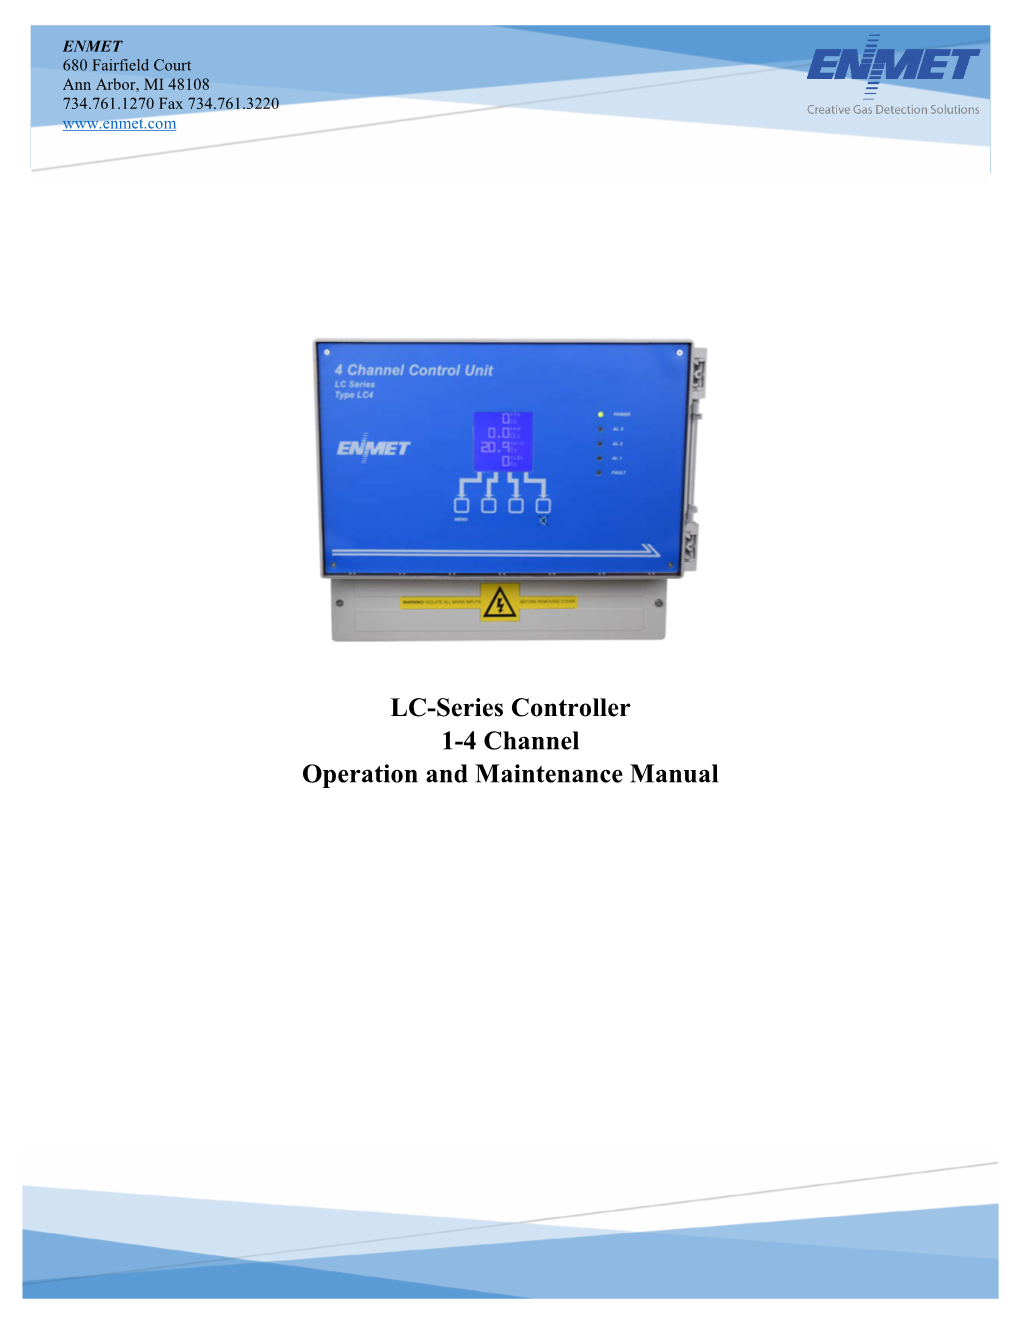 LC-Series Controller 1-4 Channel Operation and Maintenance Manual